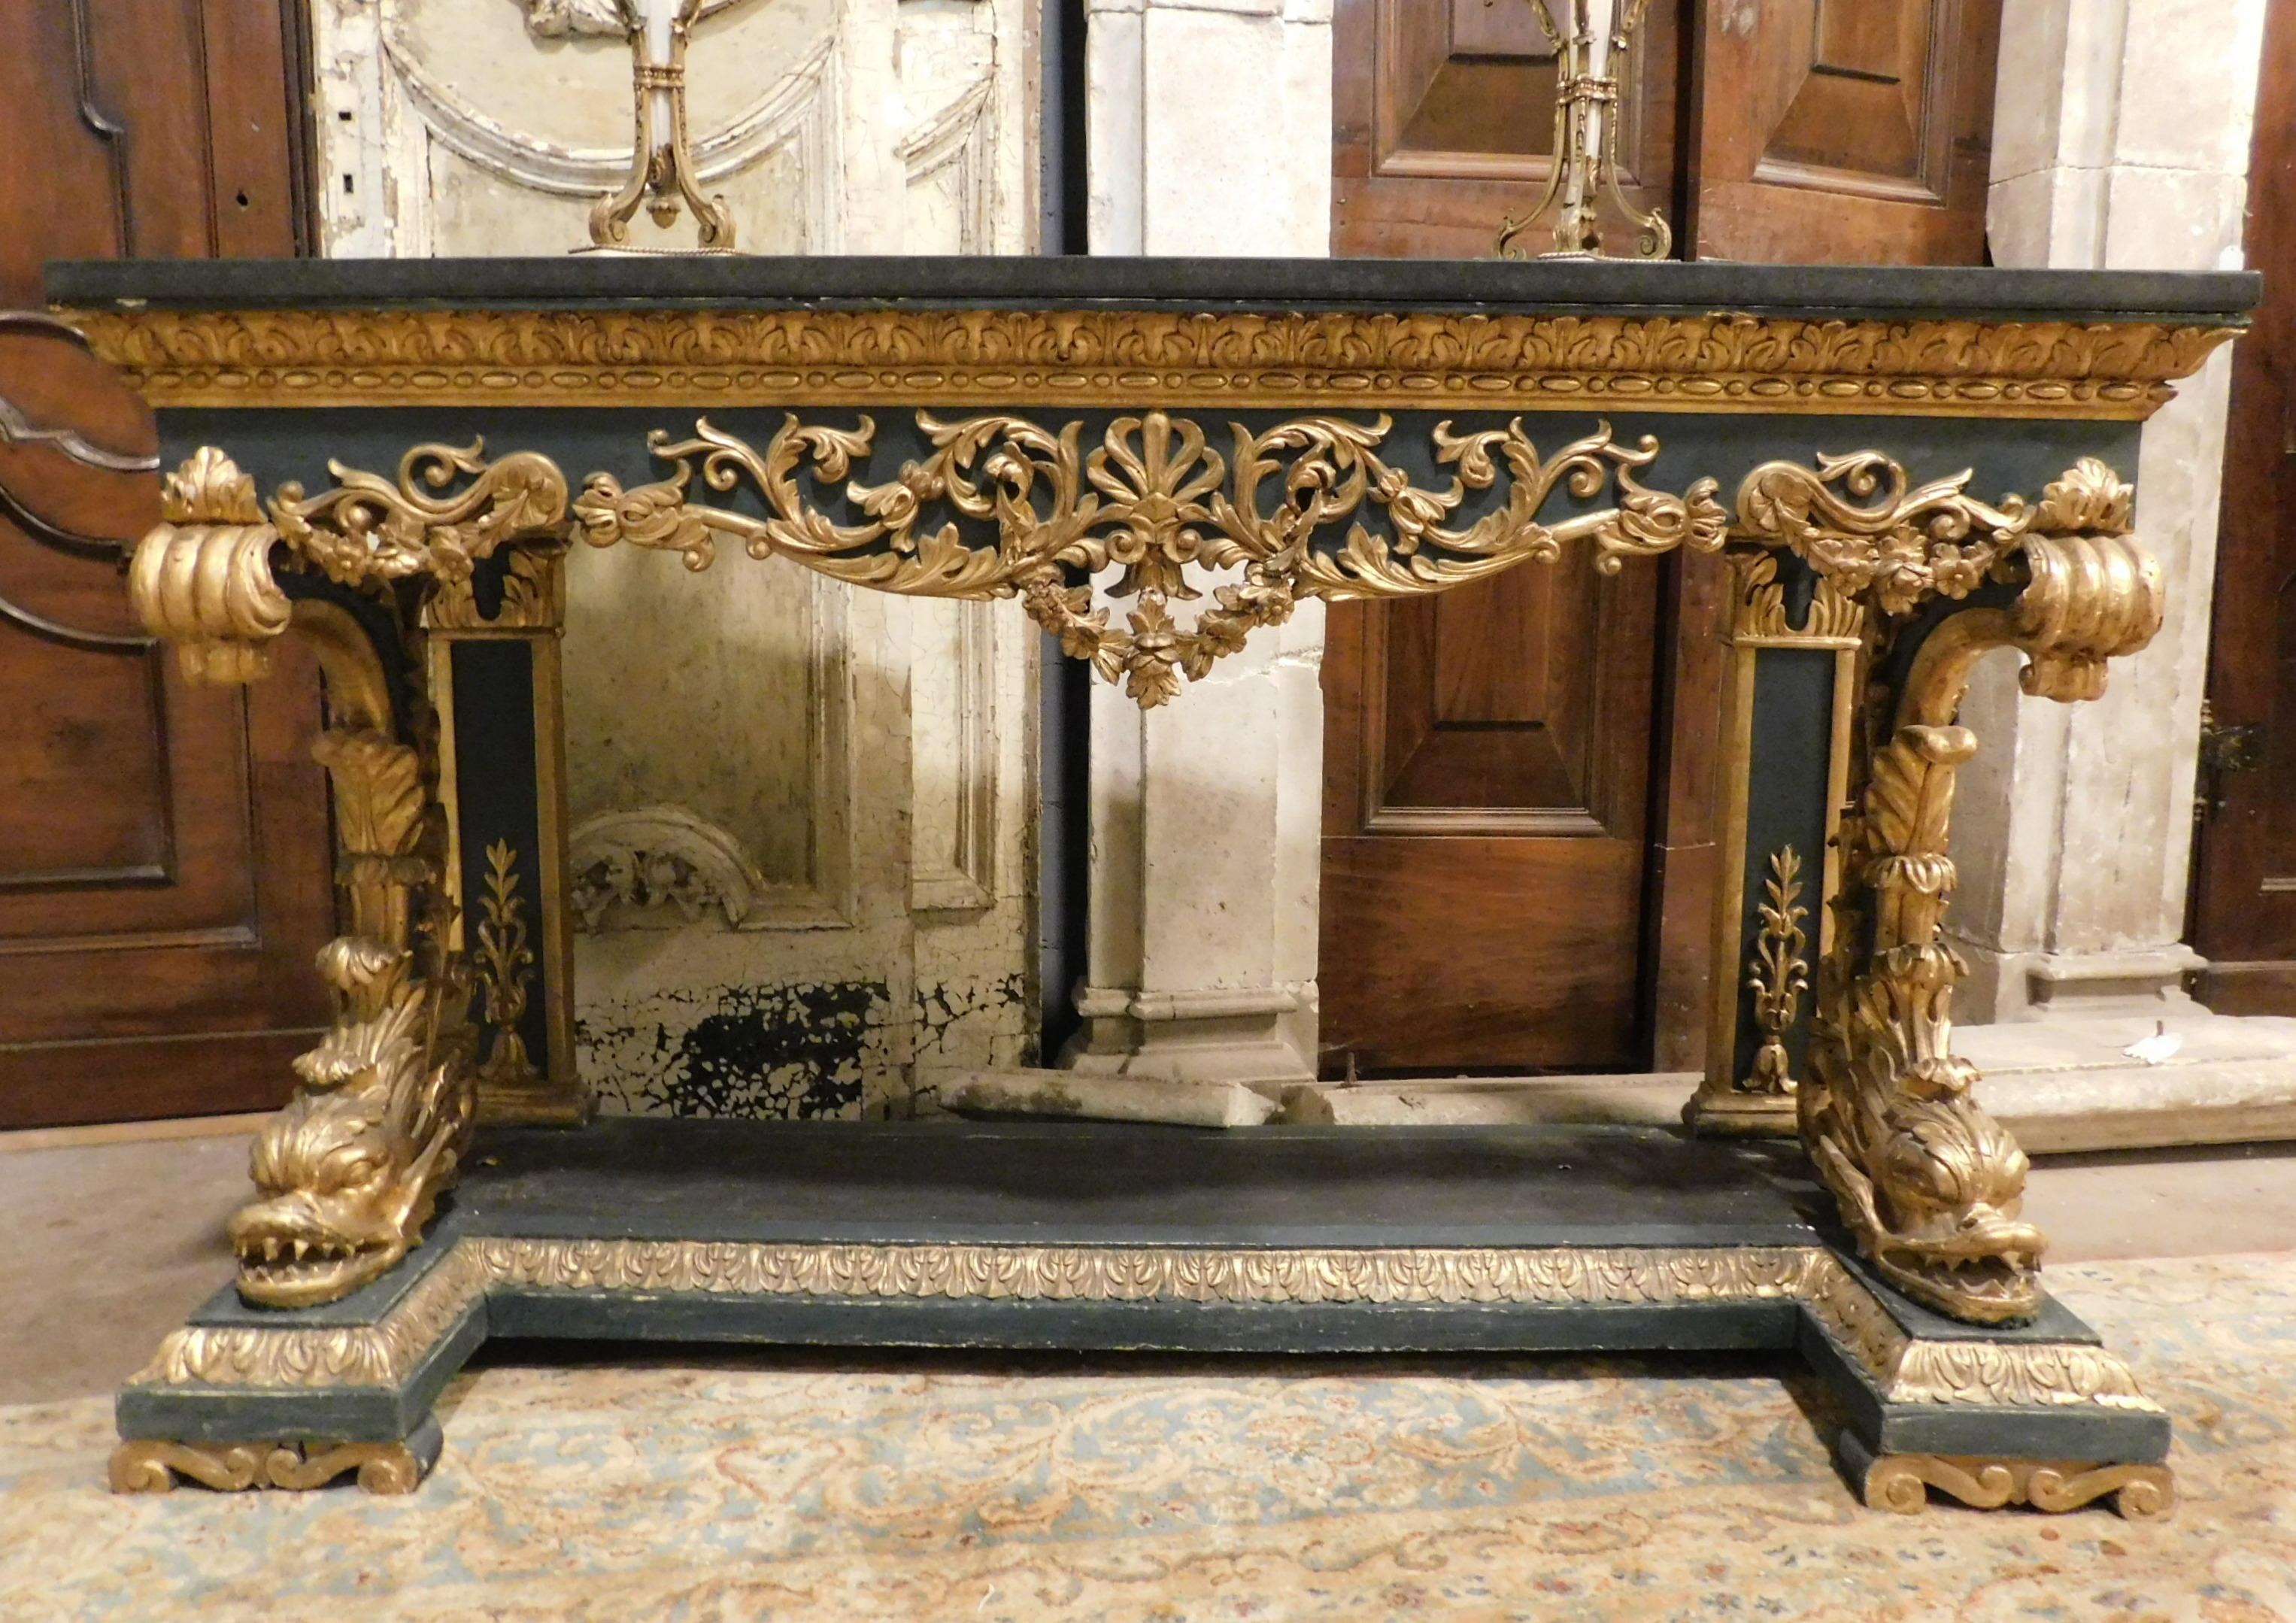 Richly hand-carved console with tritons and golden scrolls, lacquered on a black / dark green background, antique carved wooden base but with new black marble top (90s), hand-built in Italy.
Very tidy and super decorated, ideal for enriching a wall